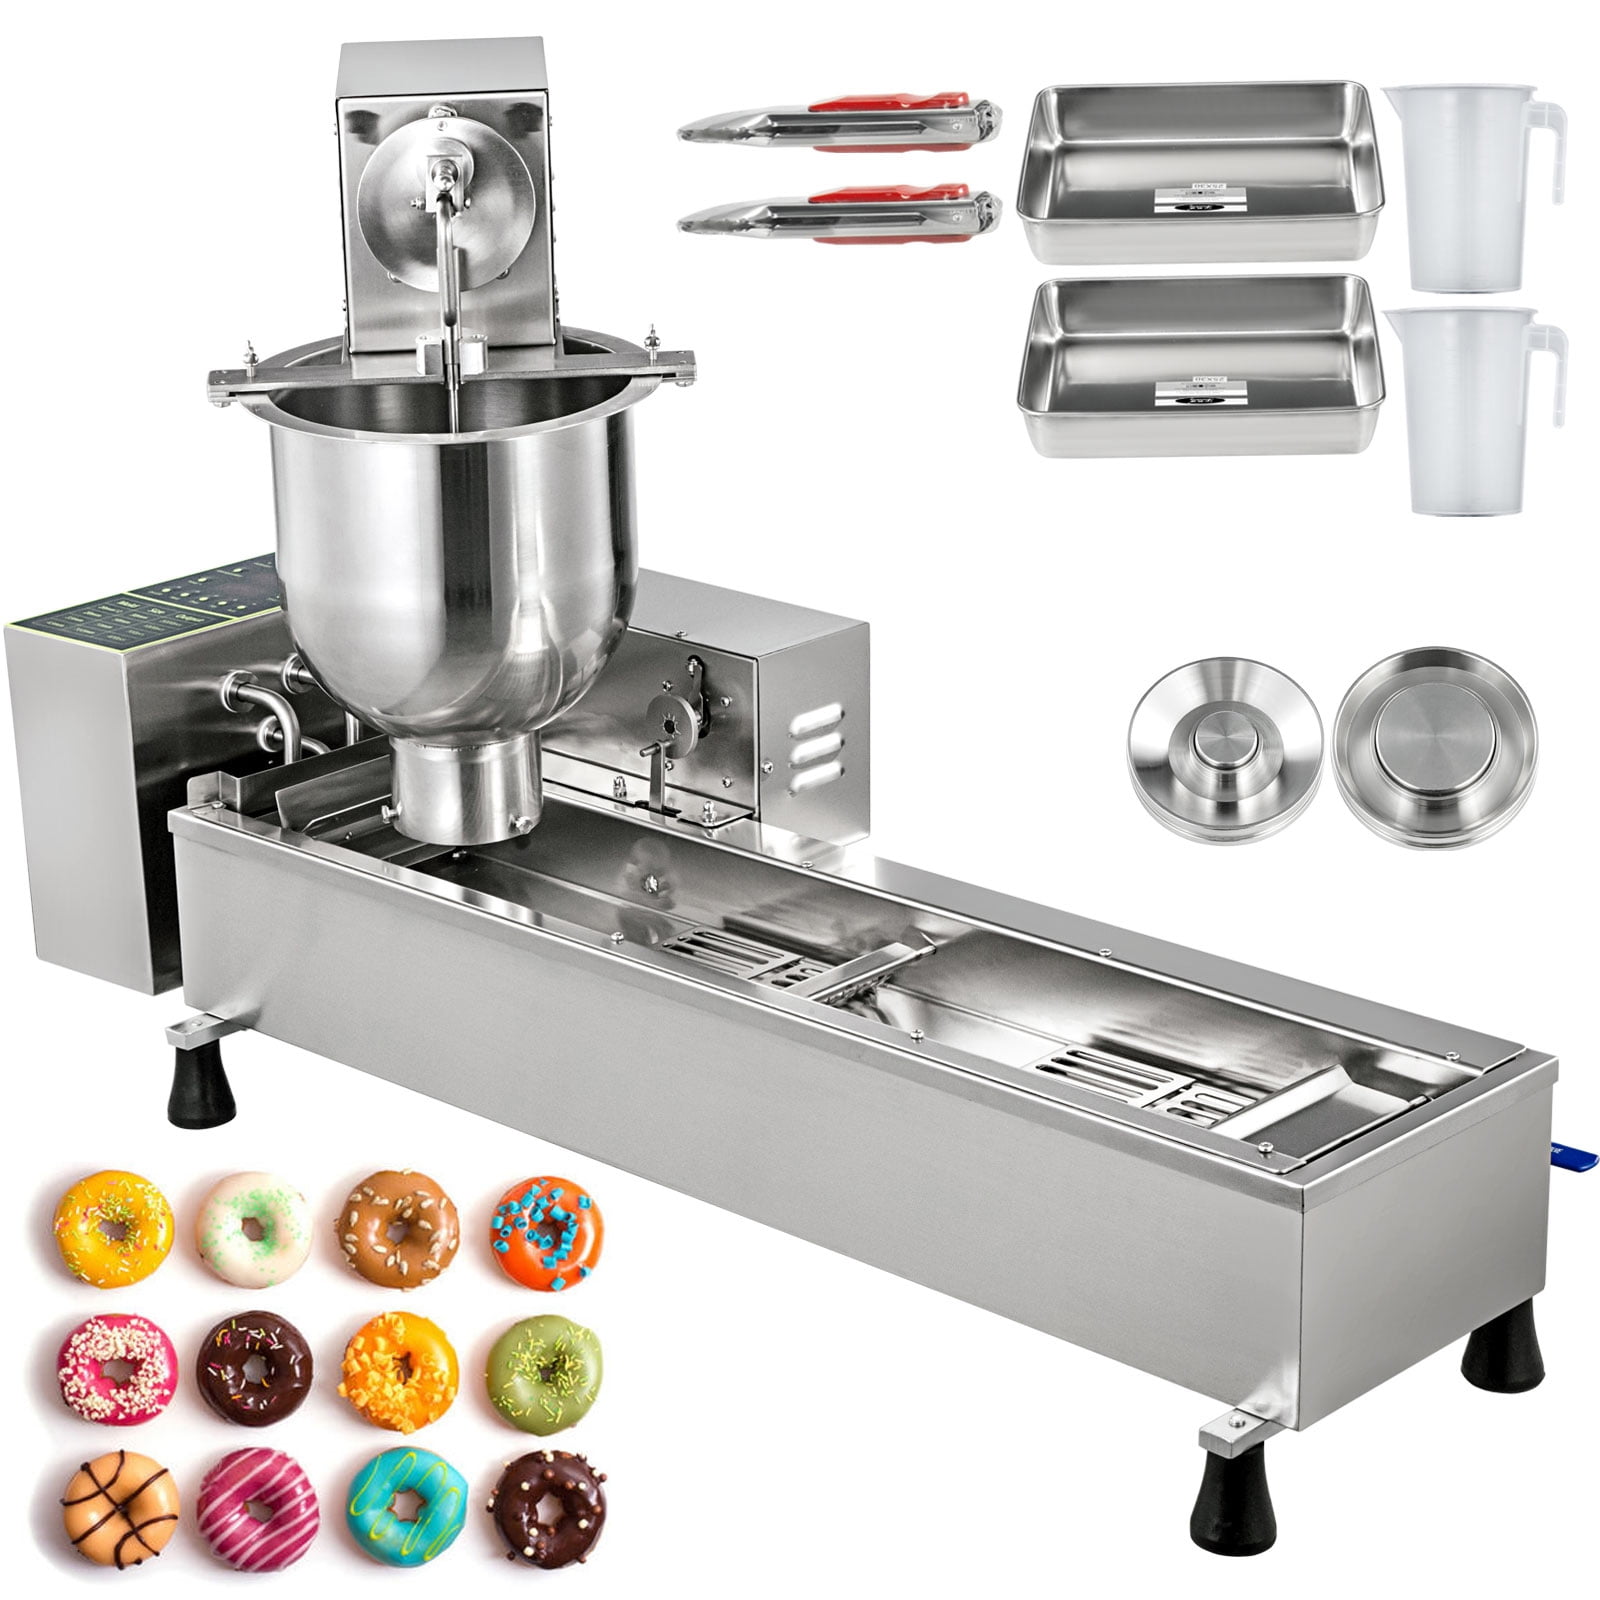 Dim Sum Bagel Bread Forming Machine Bakery Automatic Donuts Maker